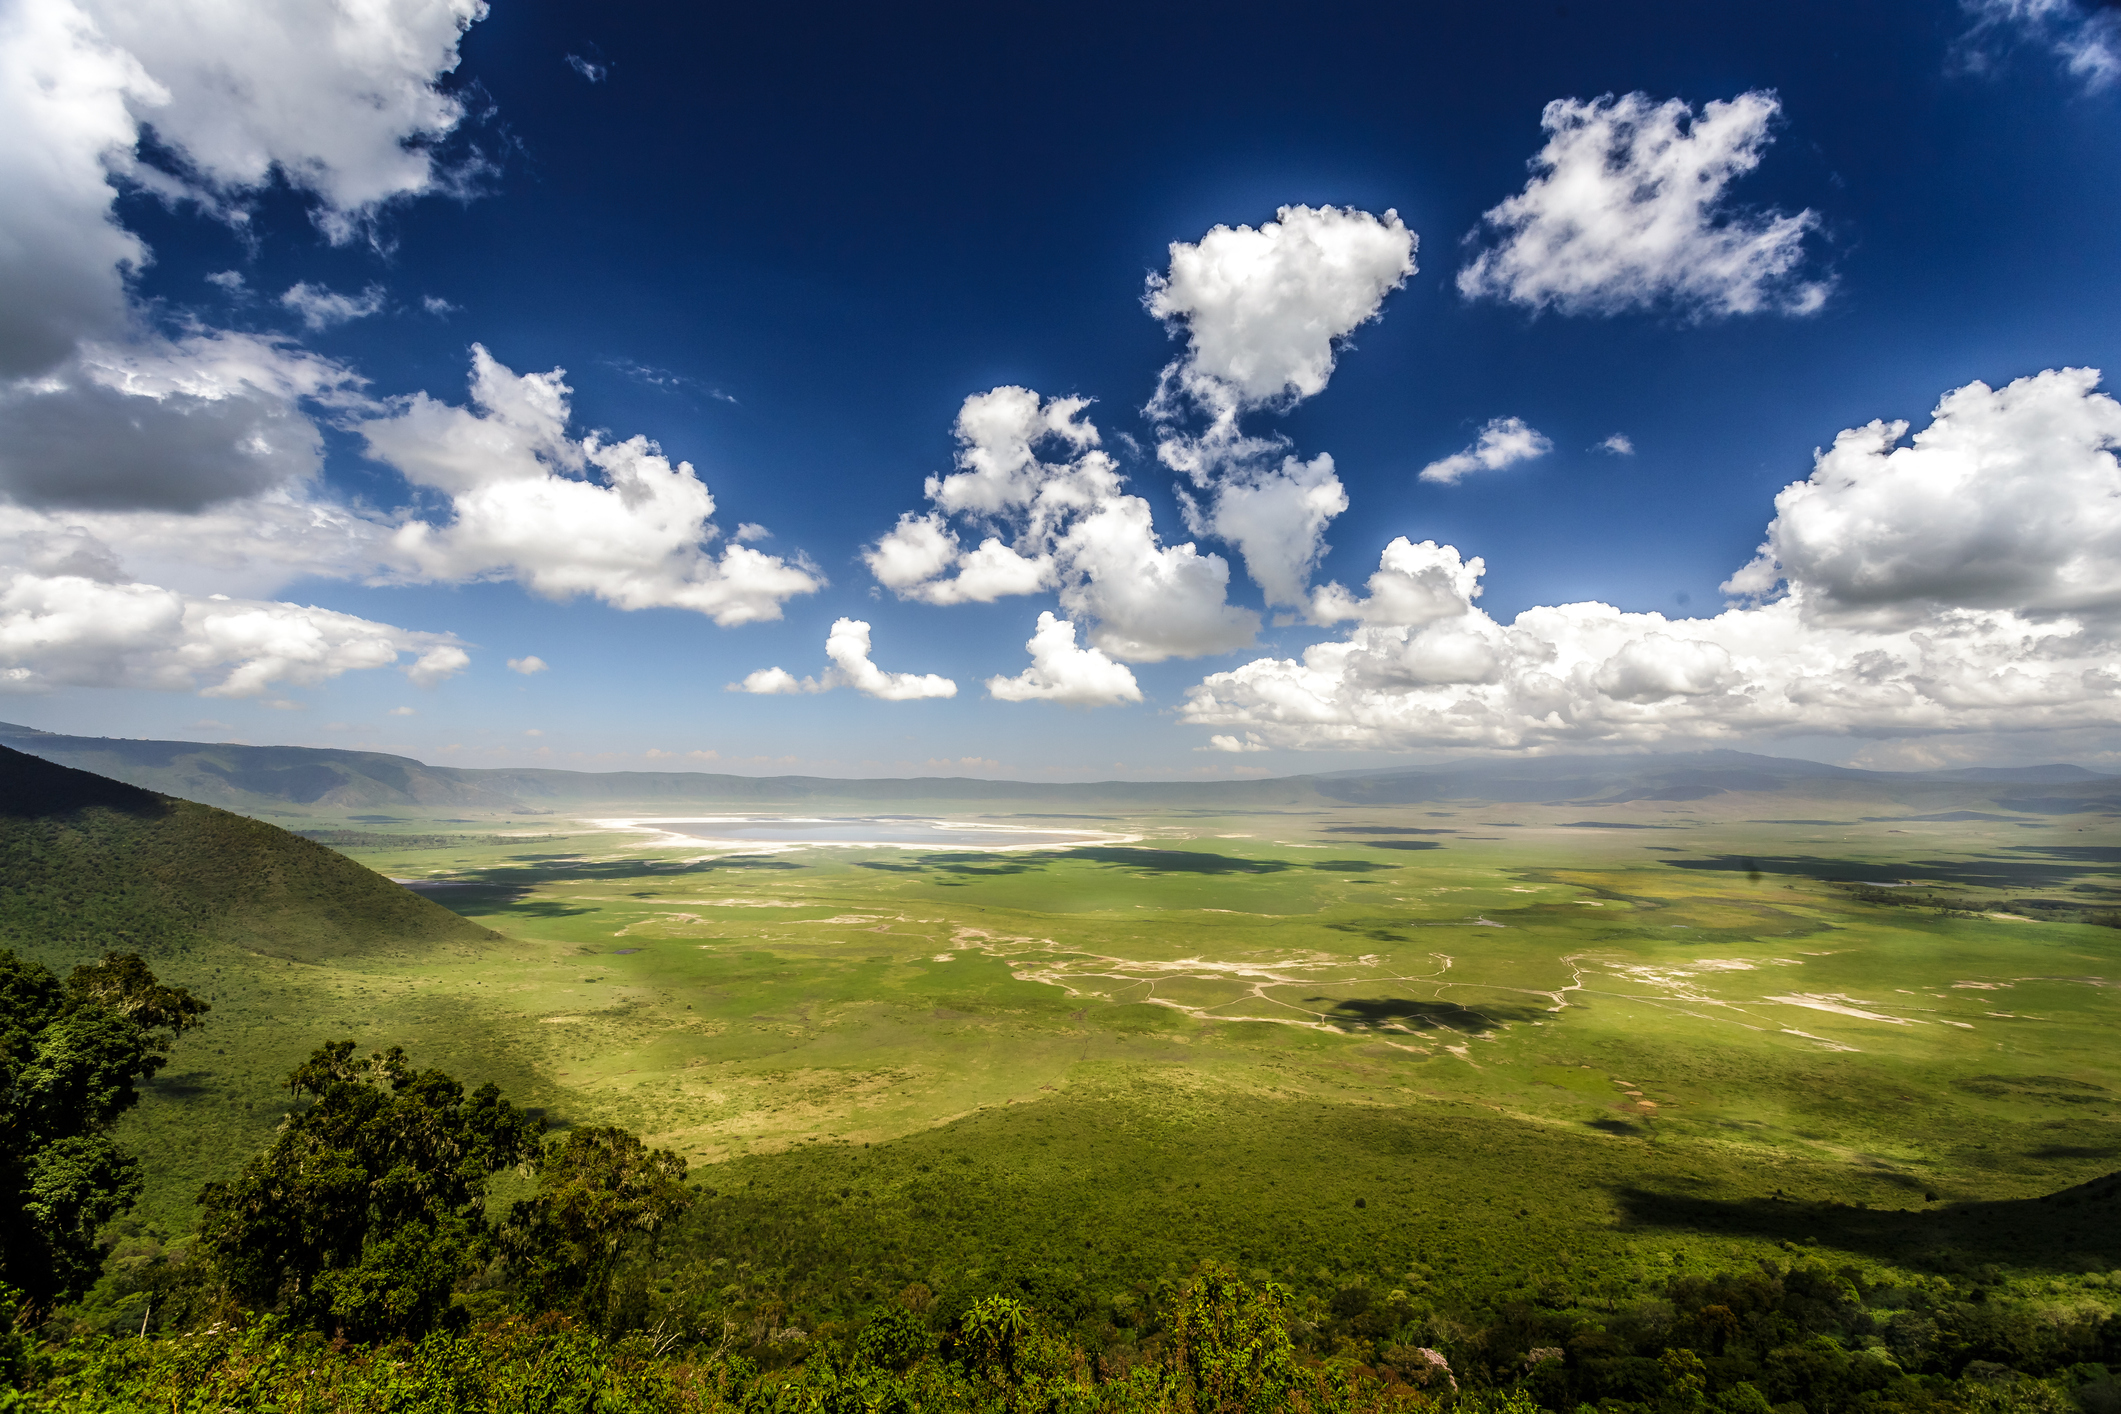 Experience extraordinary Tanzanian landscape like this intact caldera in the Ngorongoro Crater Conservation area when you take a tailor-made holiday with Alfred&.